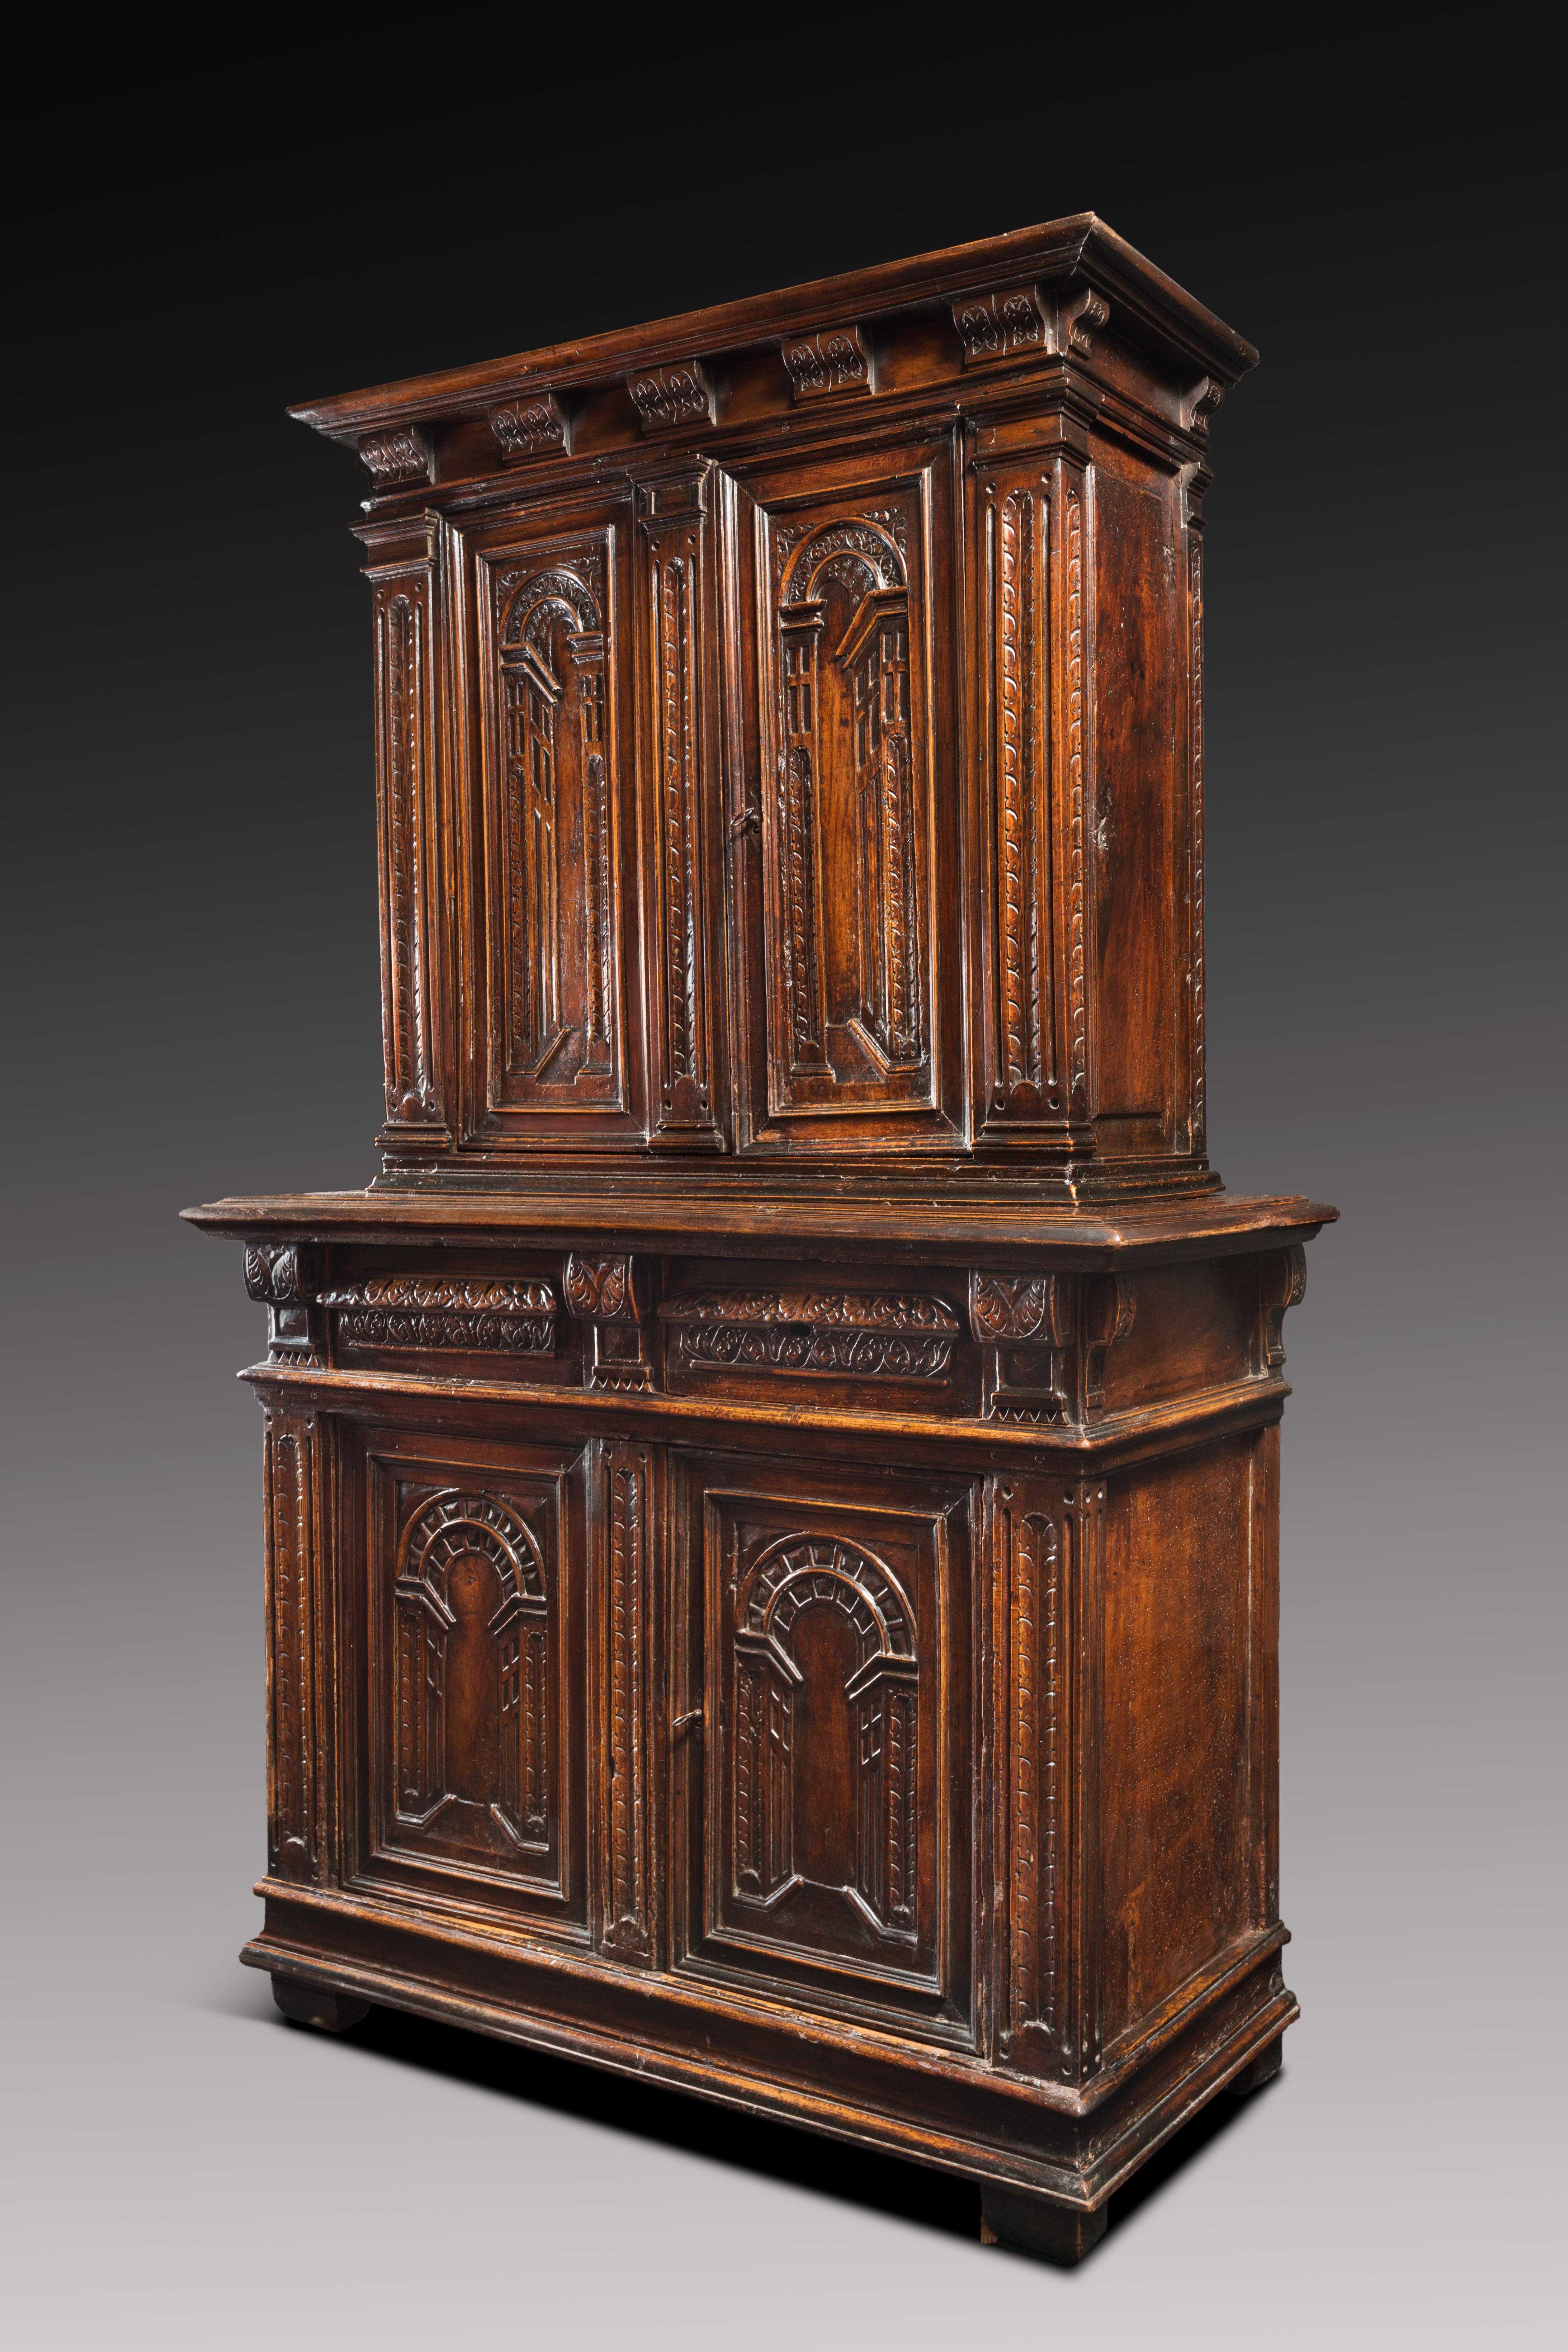 This Renaissance Cabinet reveals the great mastery of the Lyon workshops which are at the origin of its realization. Sculptors and wood-carvers worked here in symbiosis to express and translate ultramontane architectural perspectives.

Thanks to